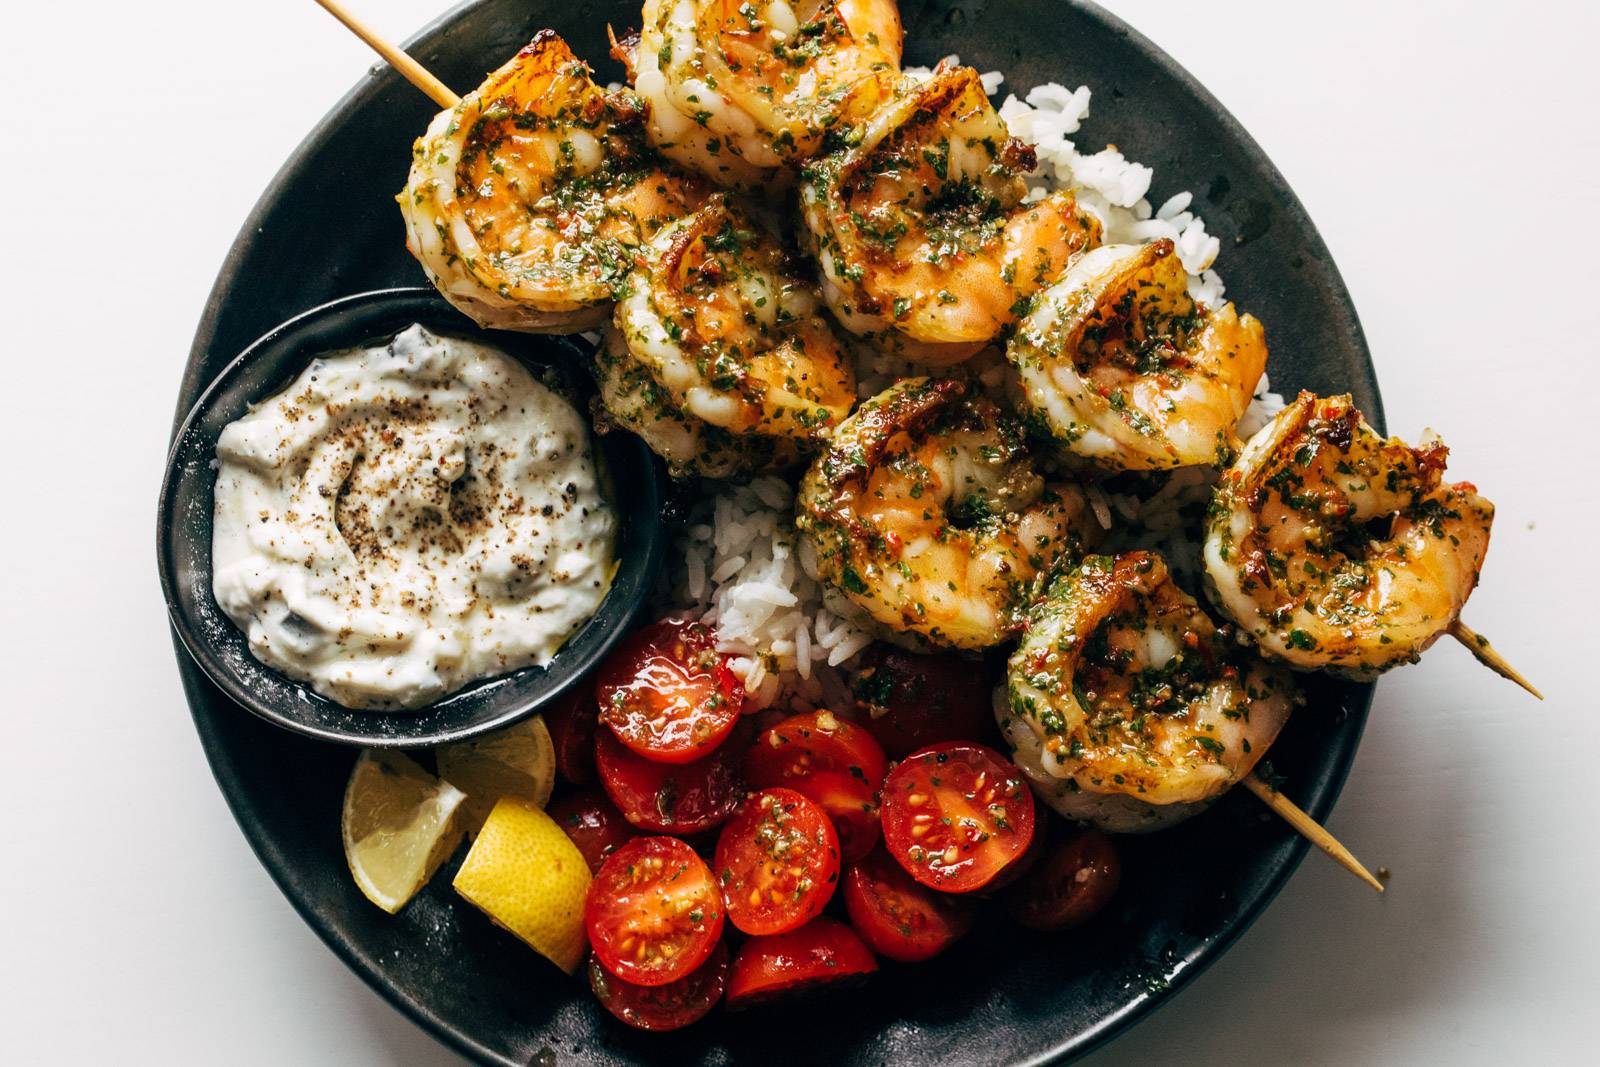 A plate filled with shrimp on skewers, rice, tomato salad, tzatziki, and lemon wedges.